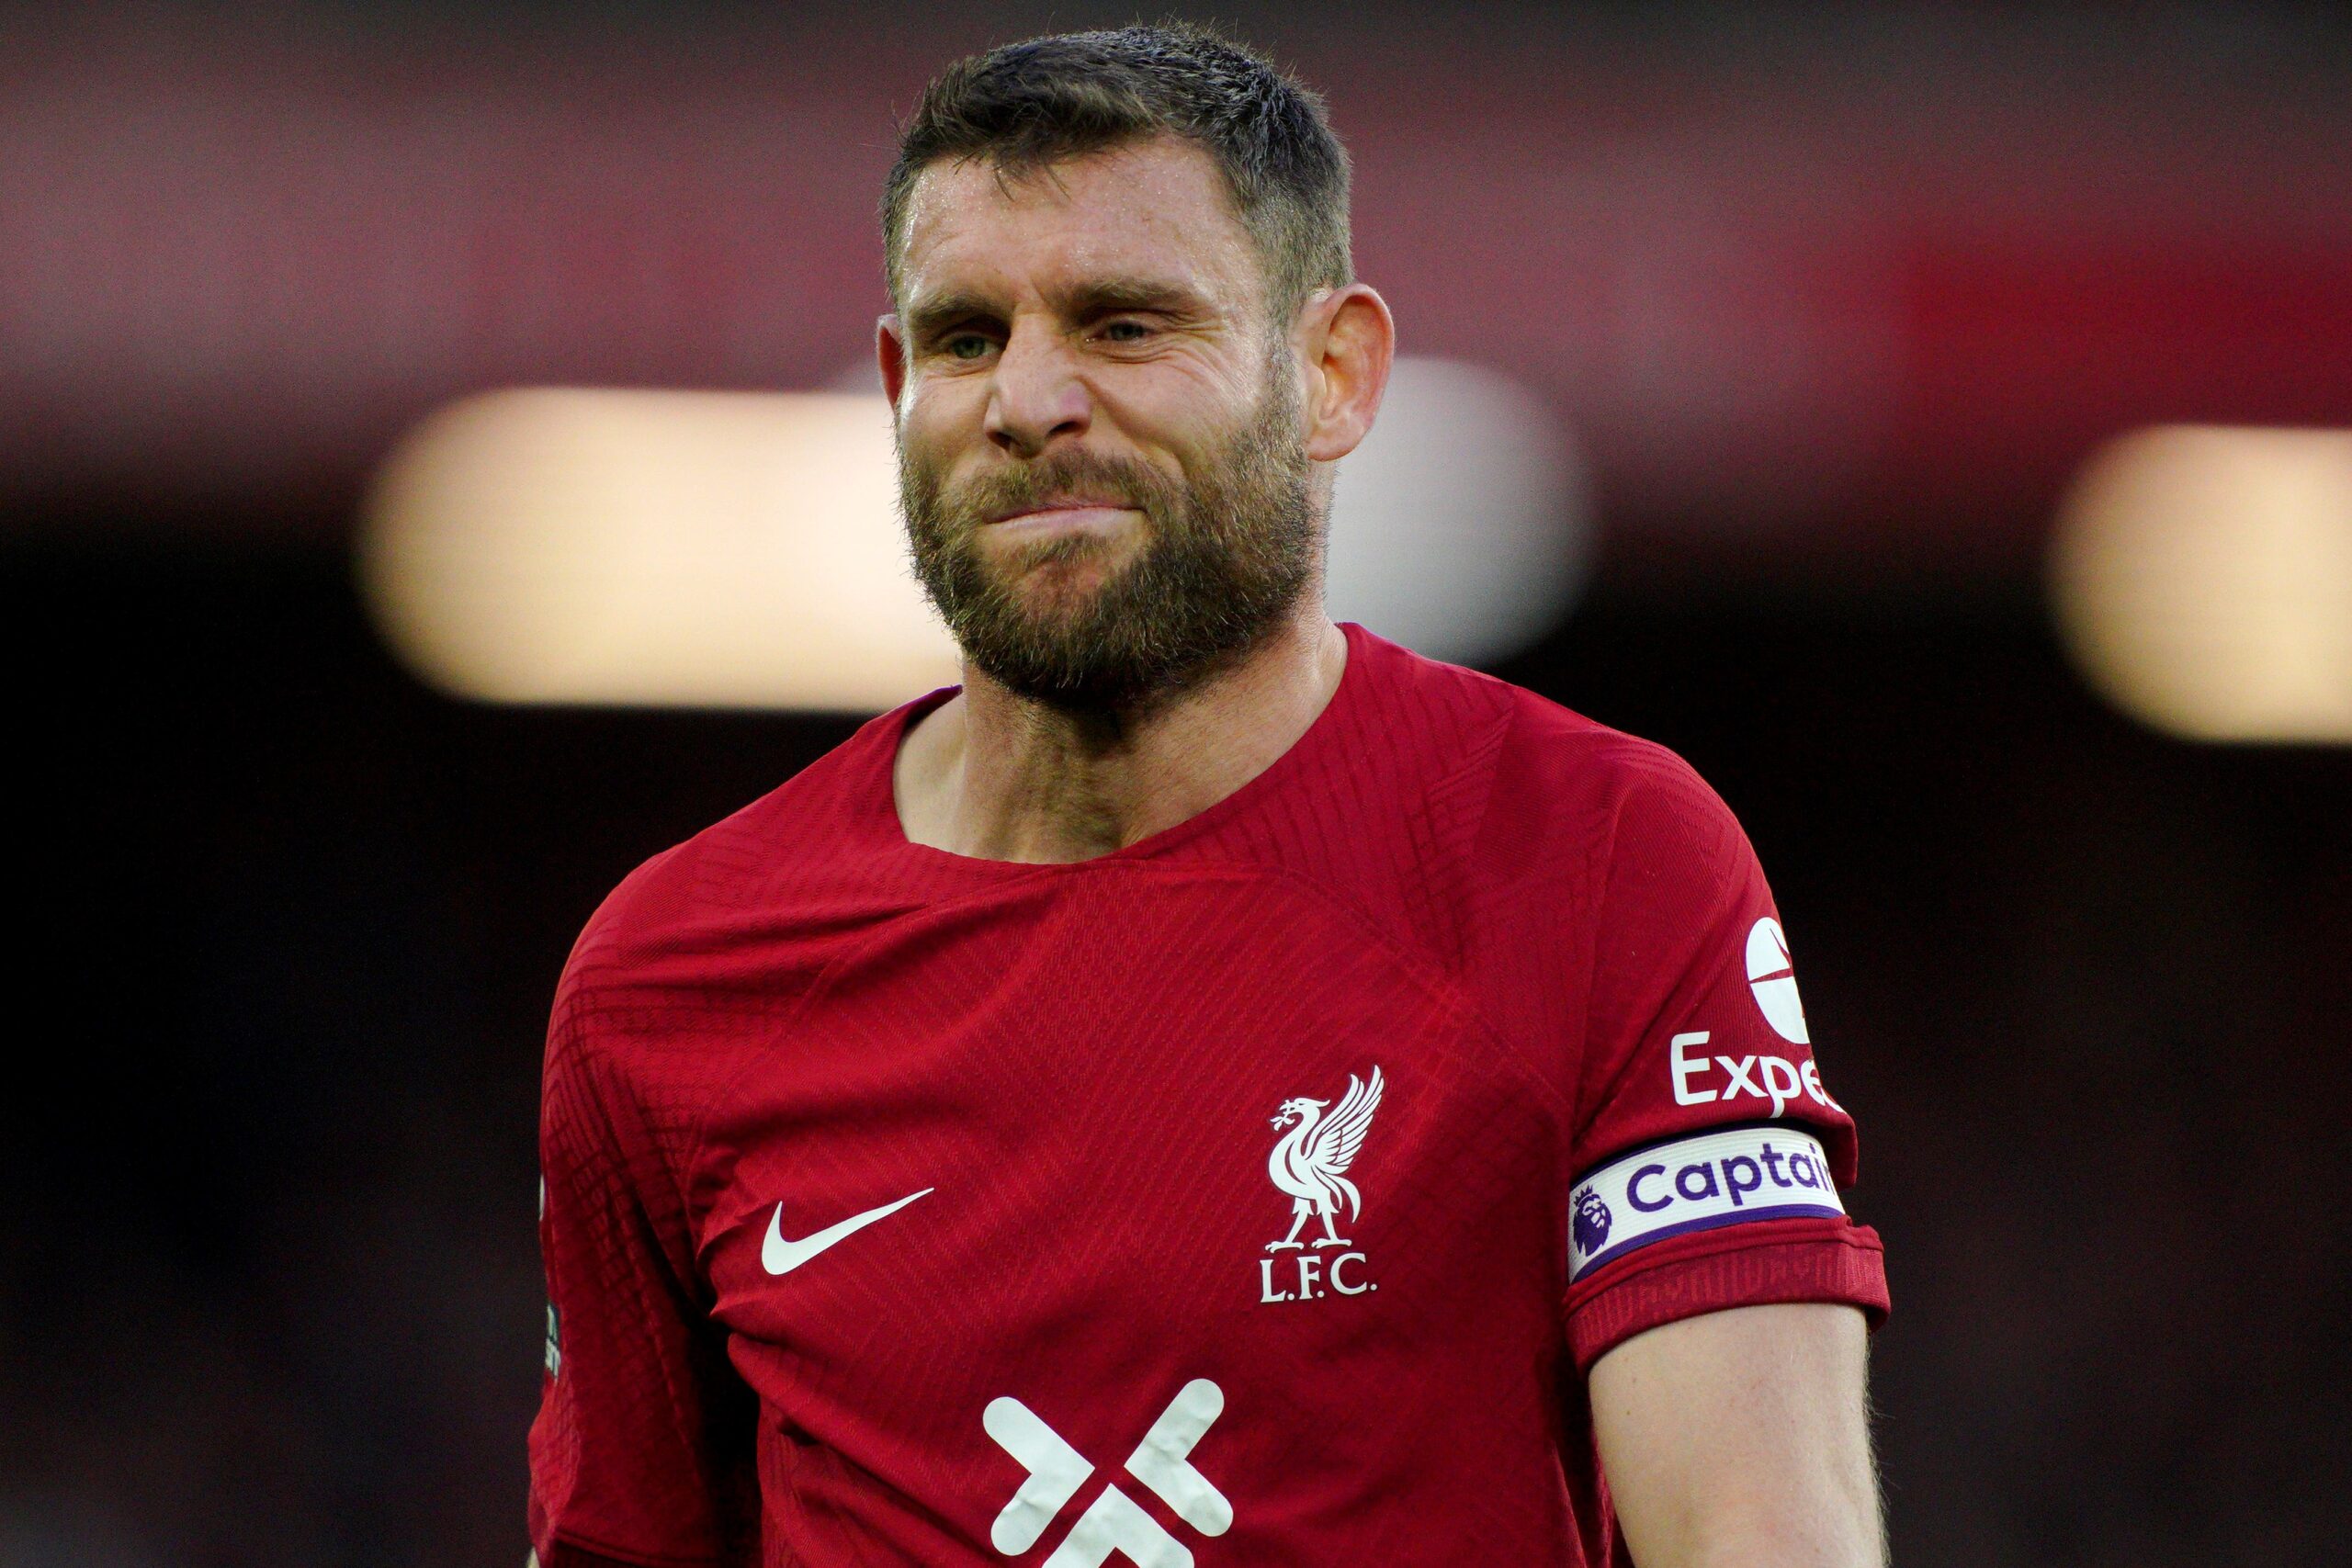 James Milner has started property searching in Brighton after verbally agreeing to go there from Liverpool